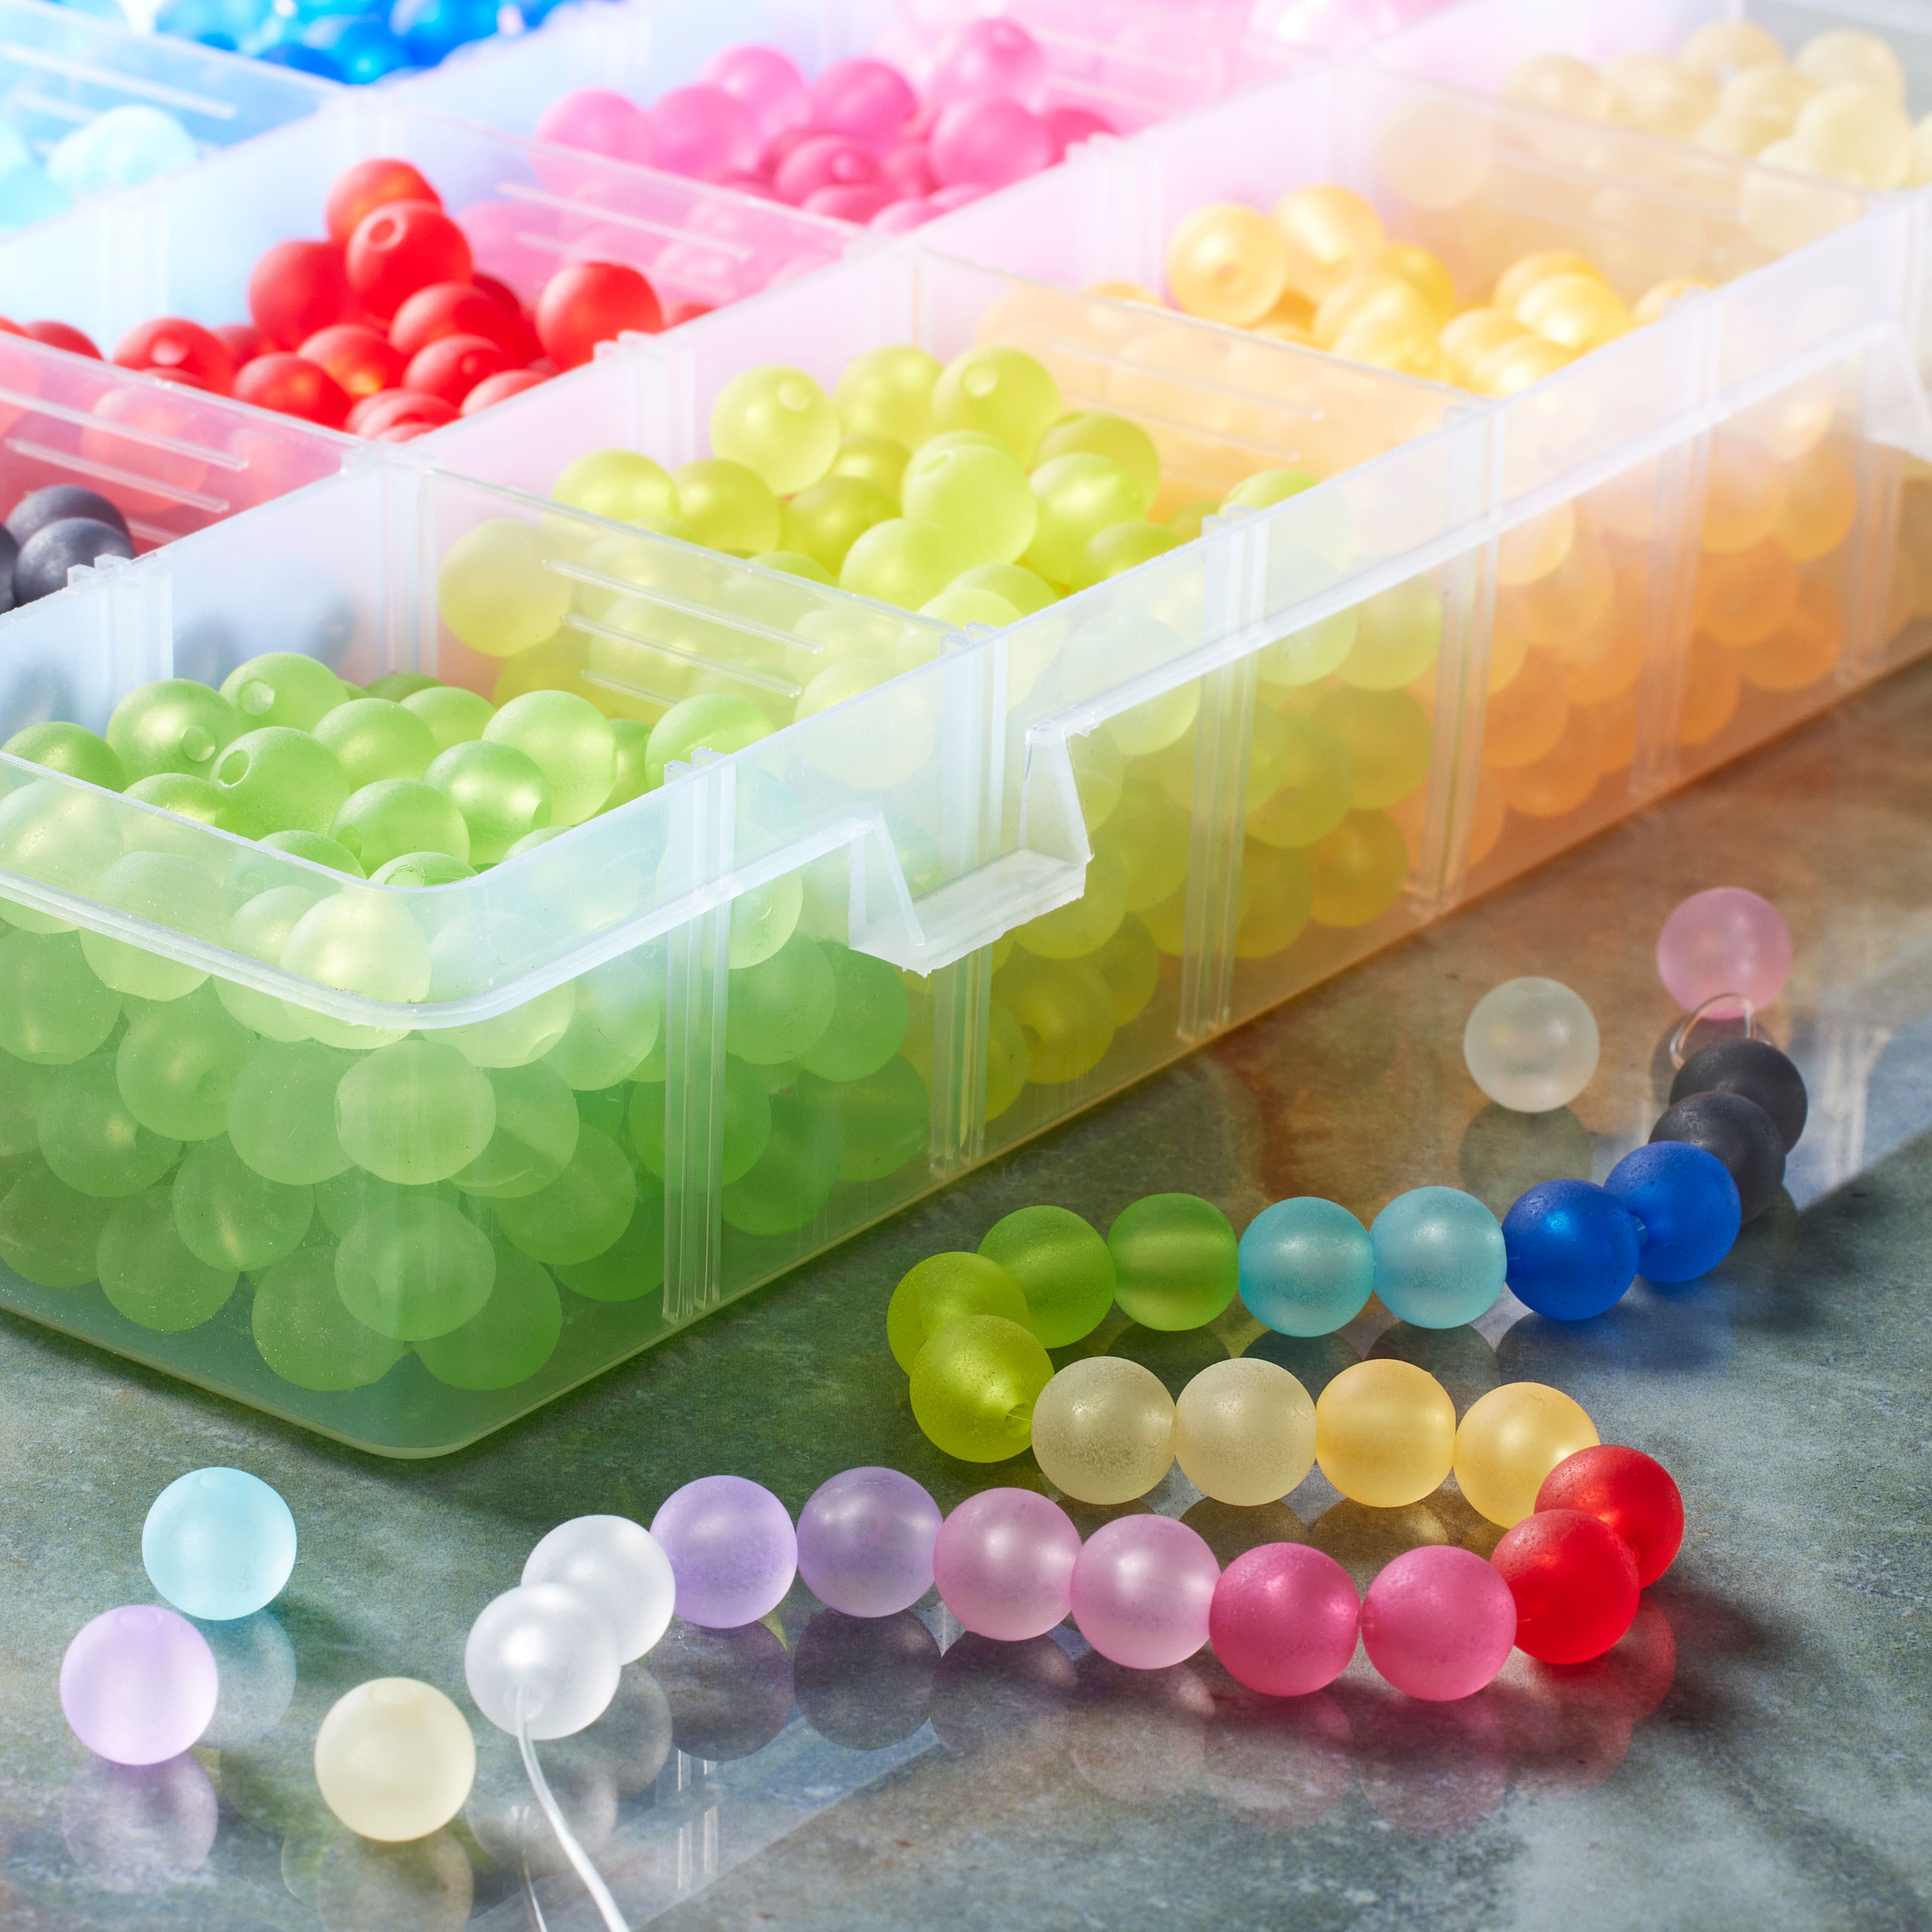 12 Pack: Multicolored Etched Crafting Beads by Bead Landing™